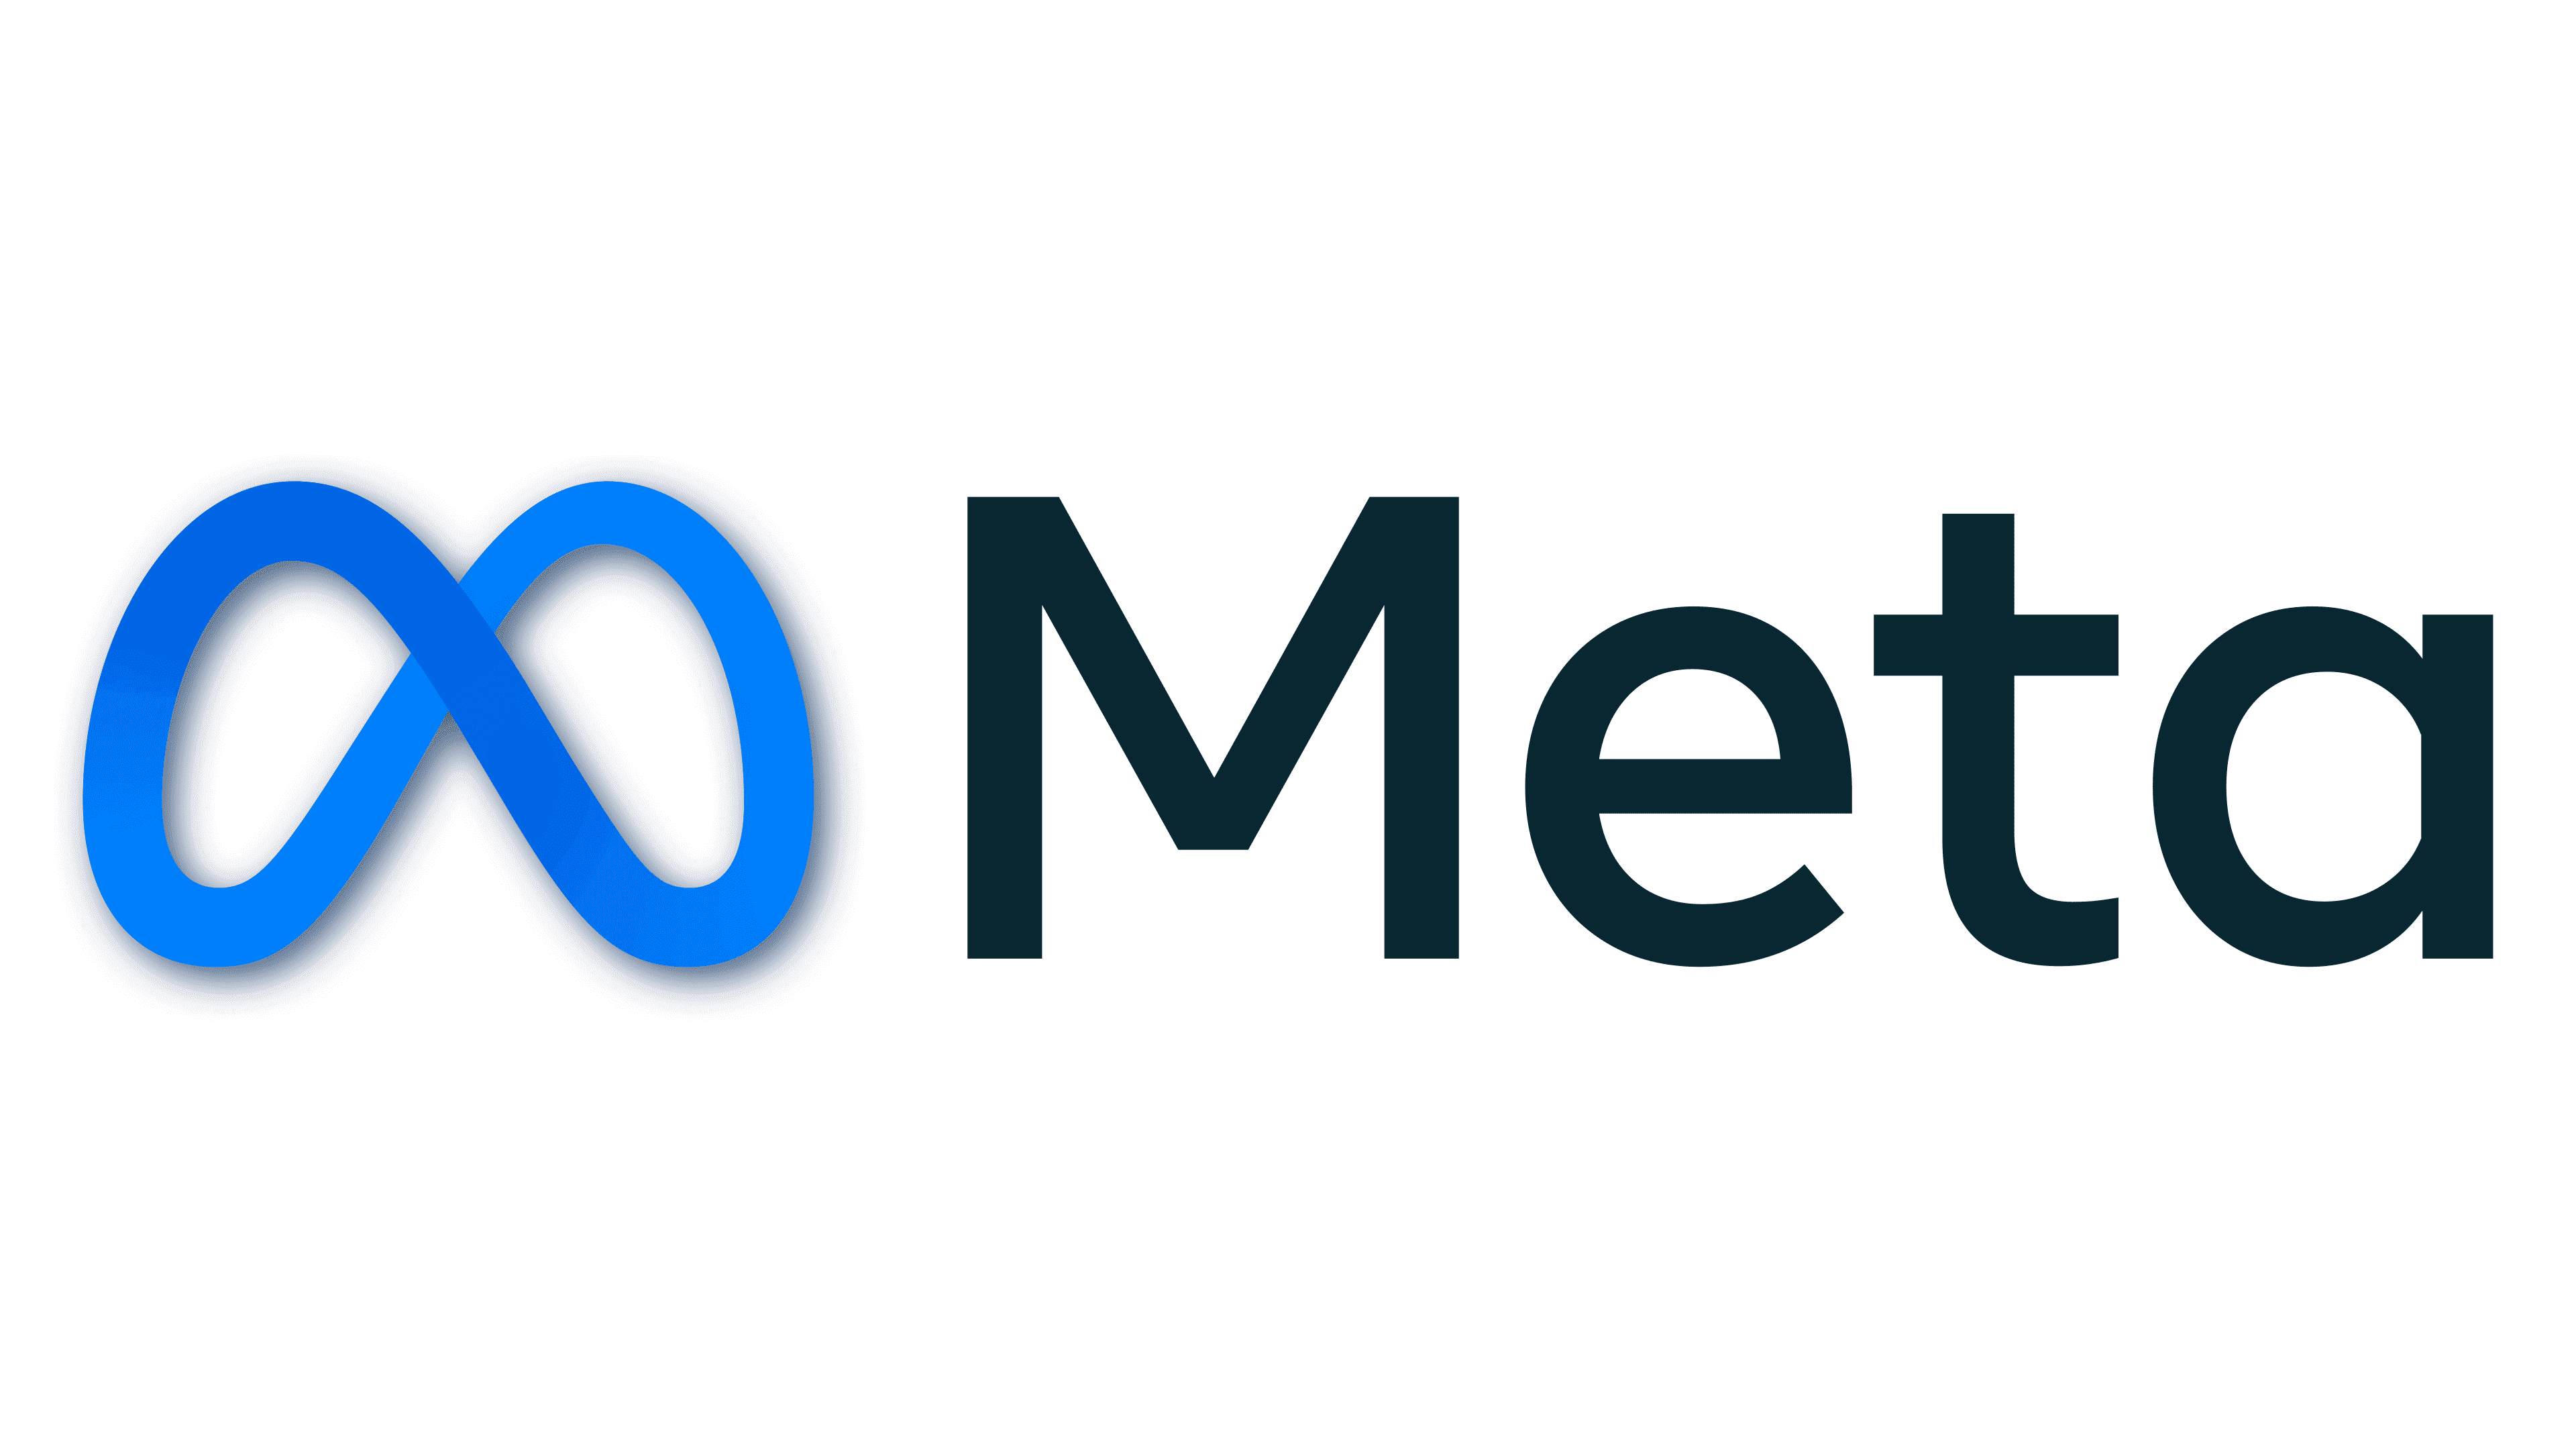 Meta posts first-ever revenue drop as inflation throttles ad sales